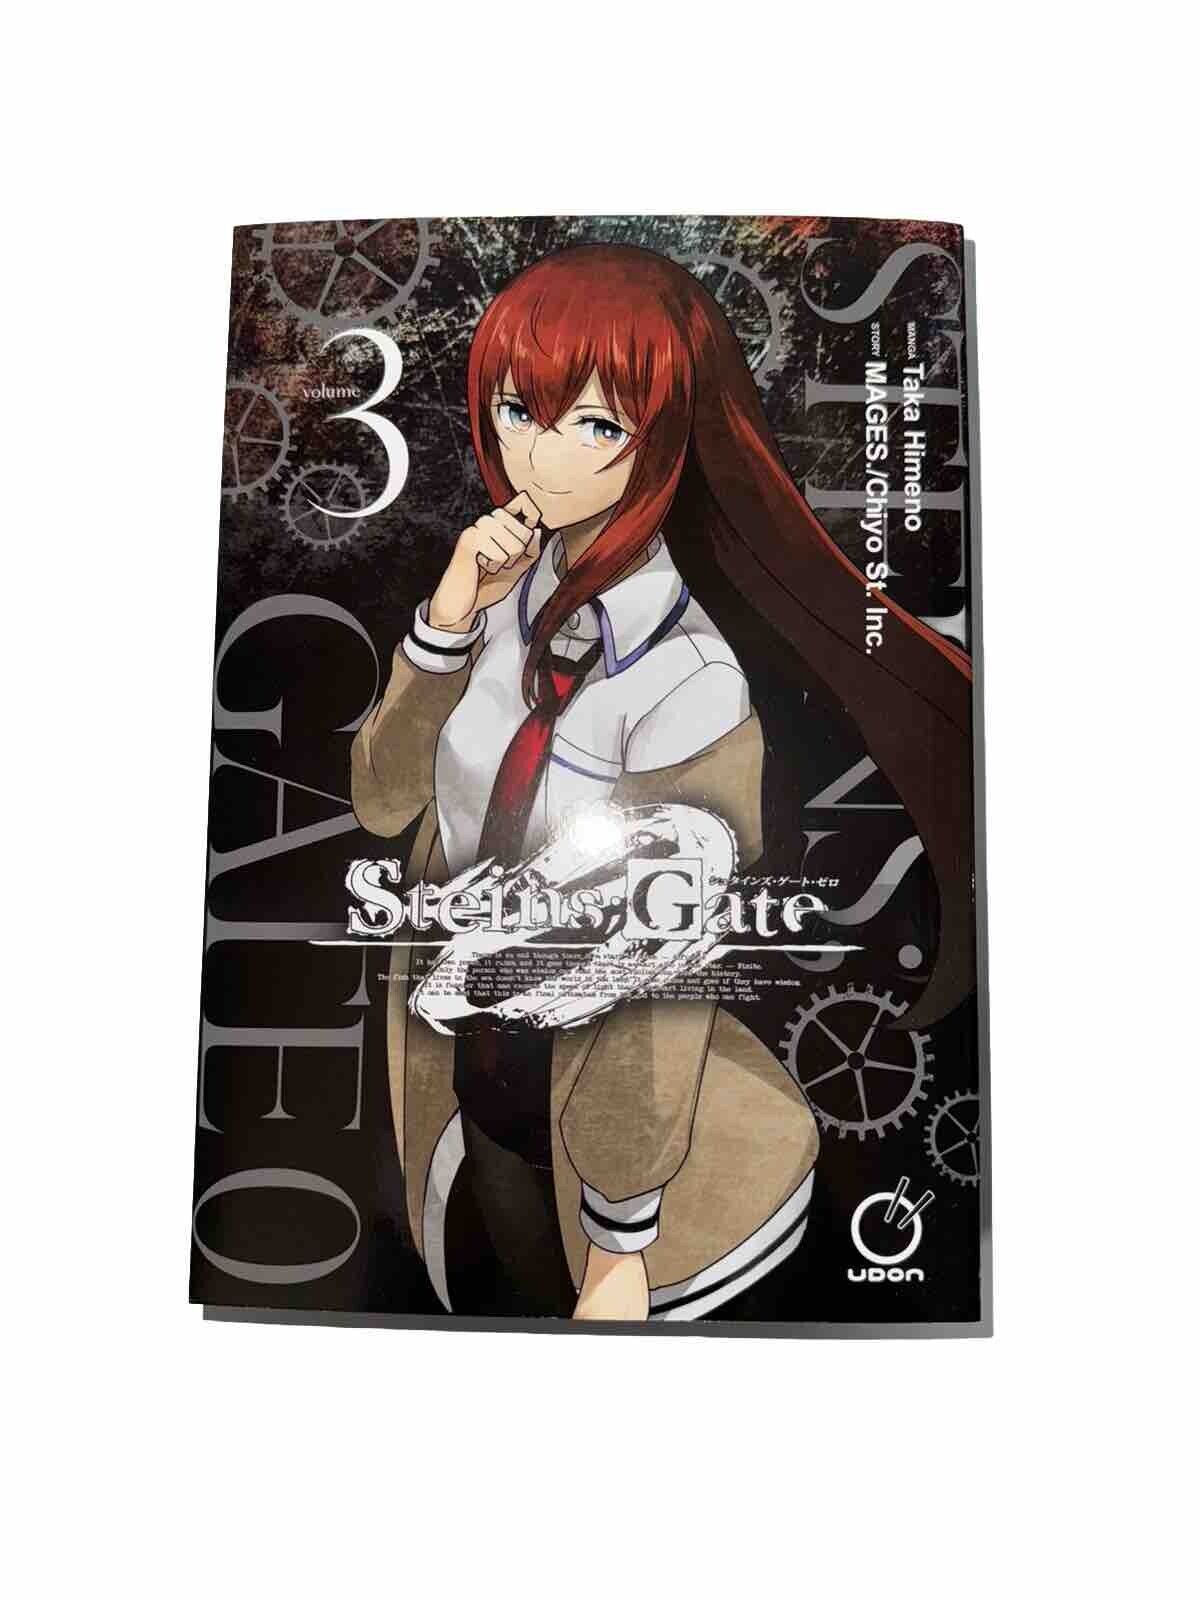 Steins;gate 0 manga Volume 3 B&N Exclusive (Poster Included)